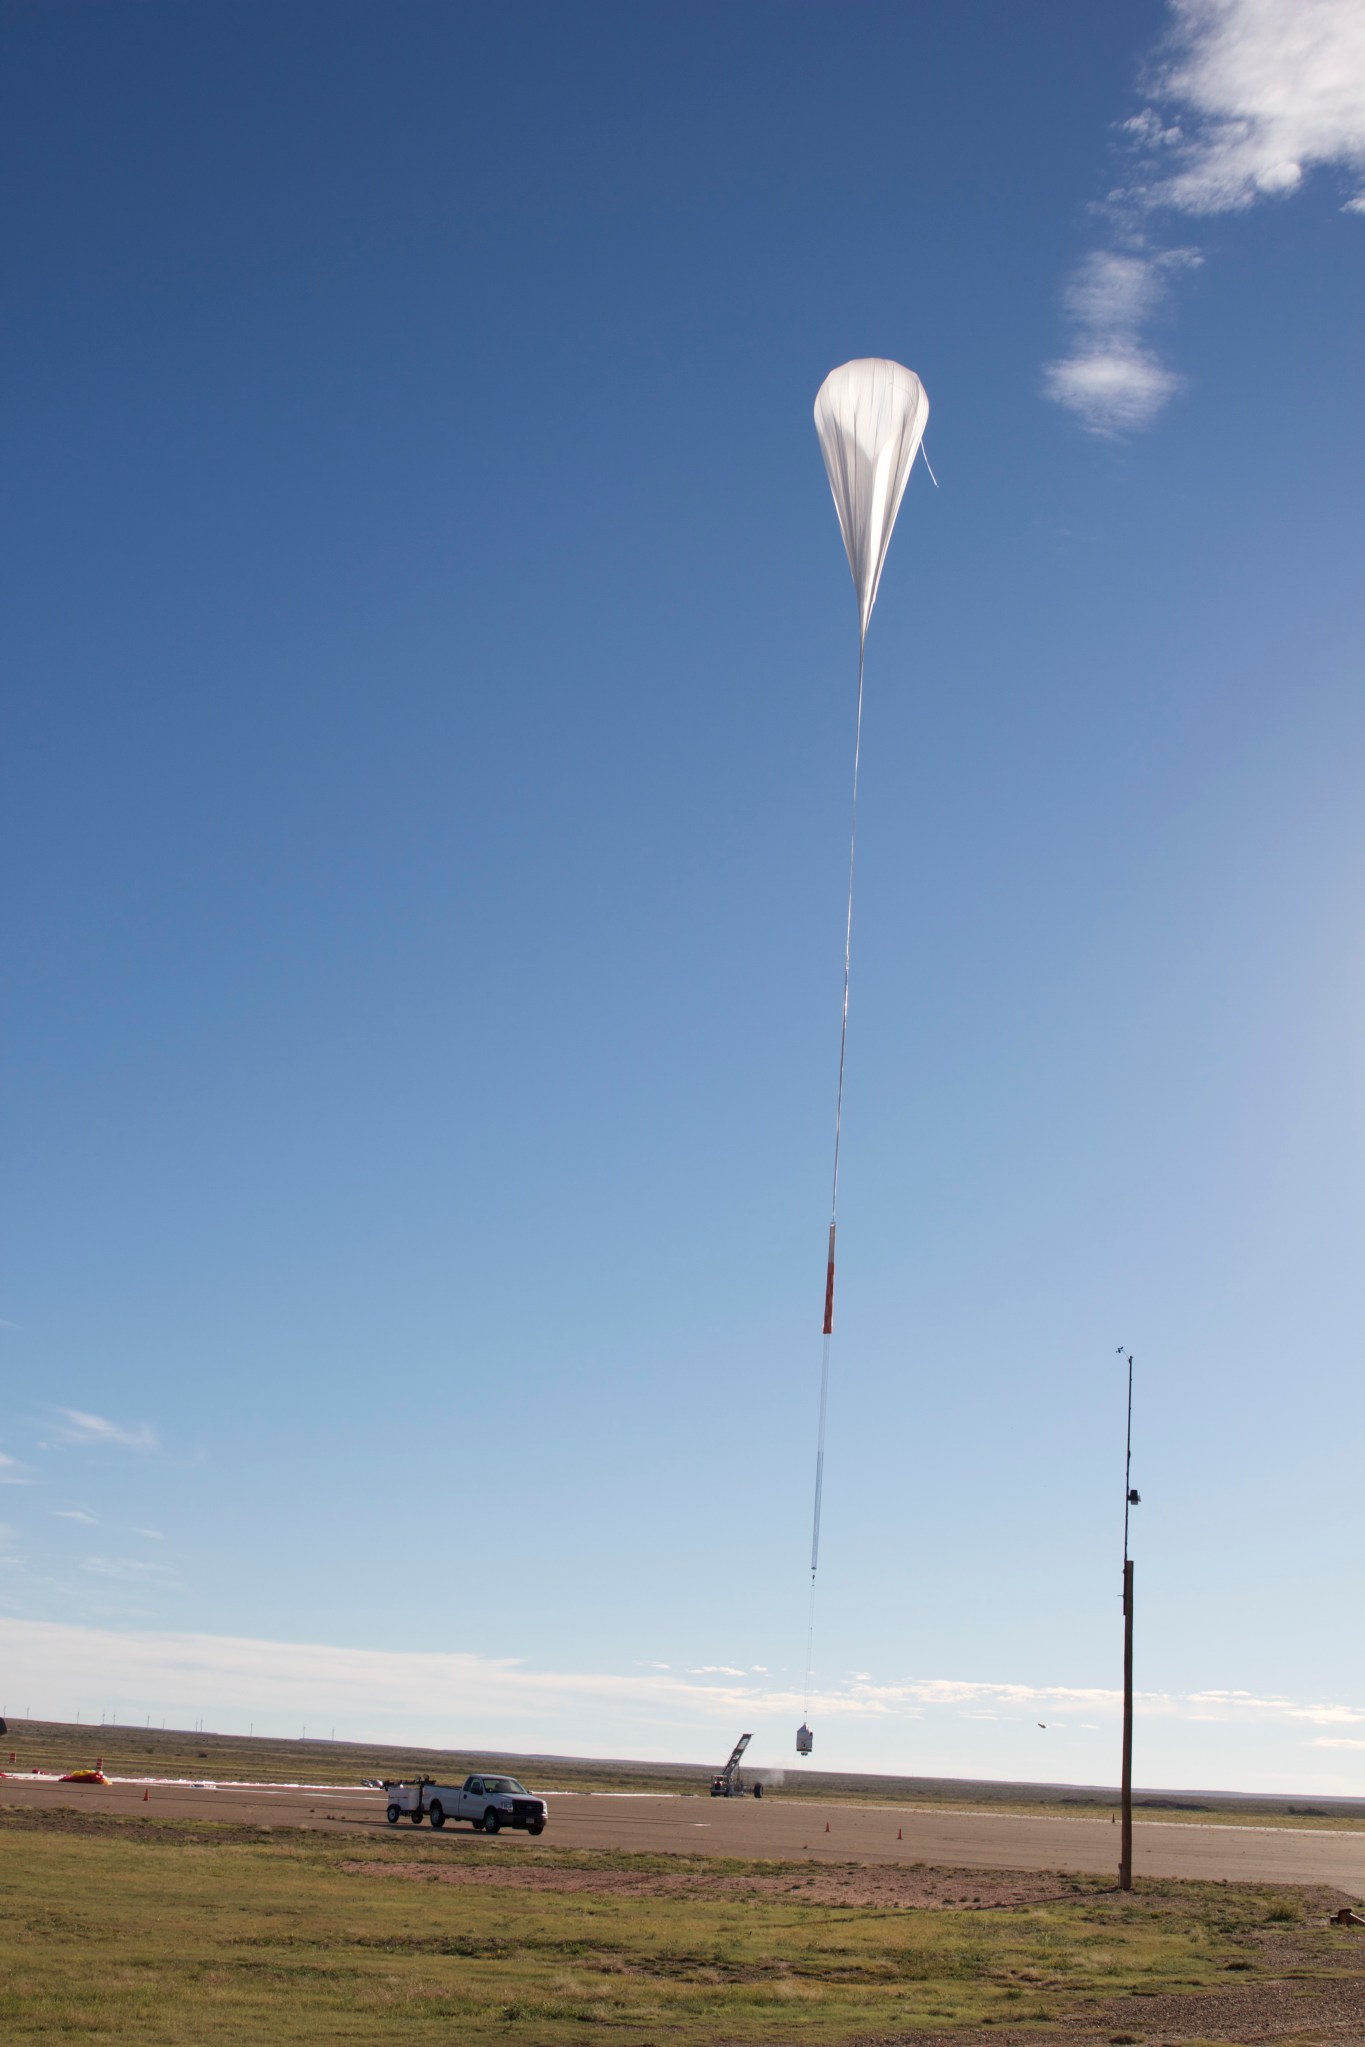 A scientific balloon is partially inflated in the air.